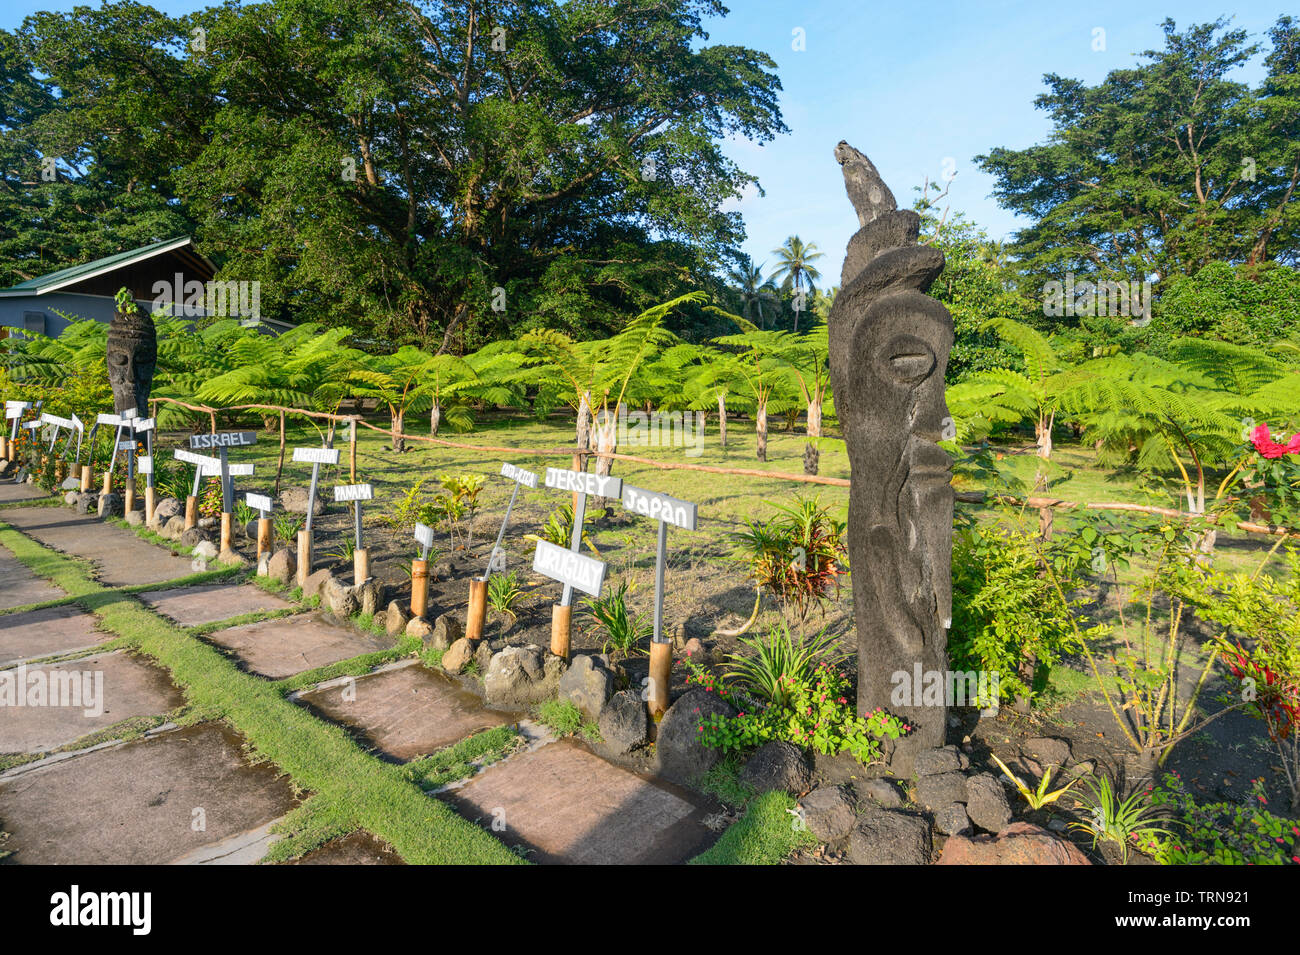 The garden near Mt Yasur Volcano has signs with visitors' country name, Tanna Island, Vanuatu Stock Photo